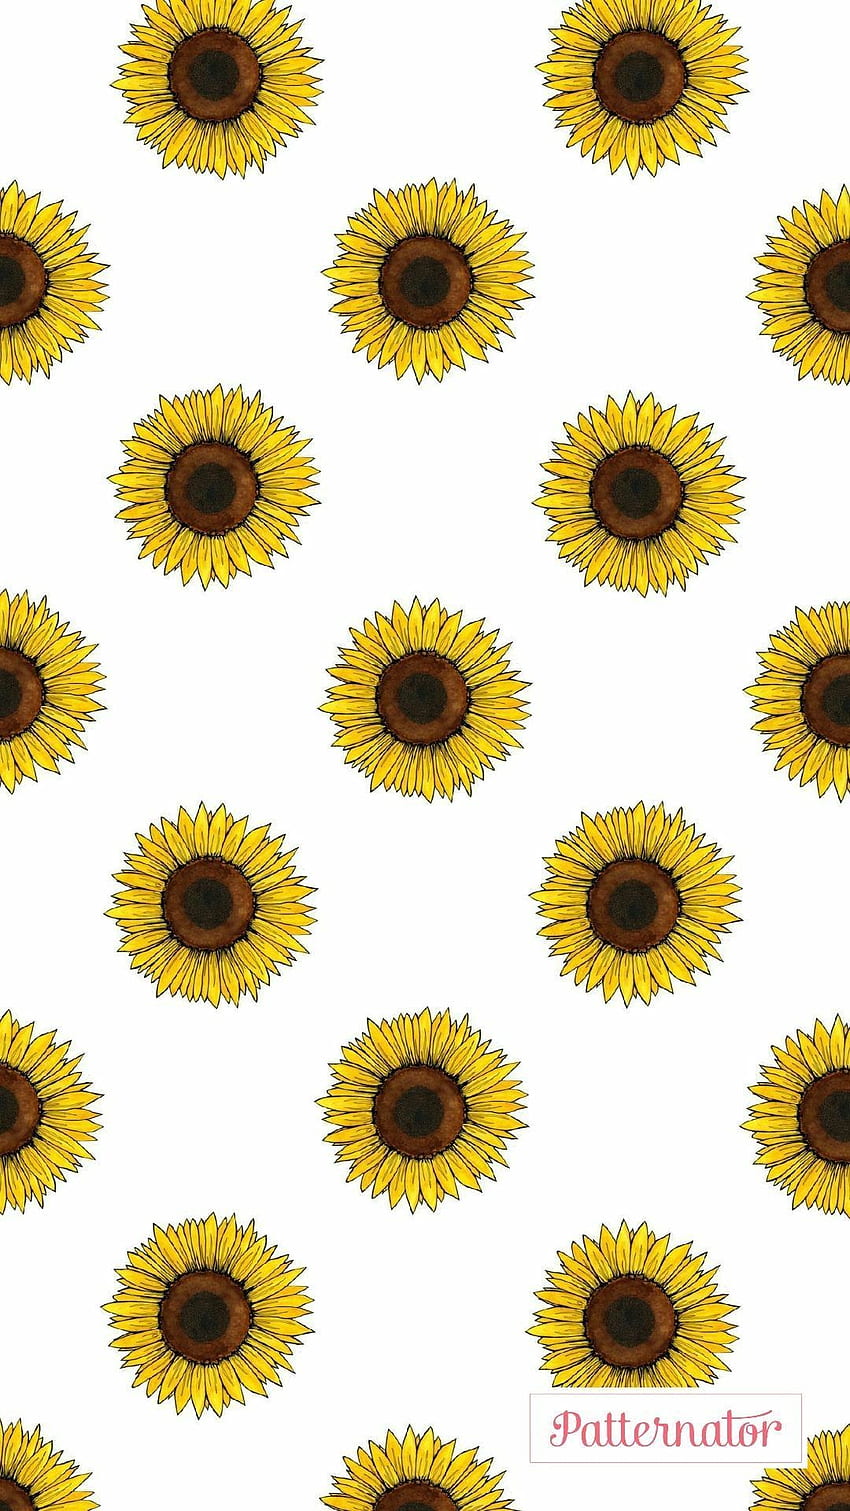 Channel the Spirit of Van Gogh and Learn How to Draw a Sunflower